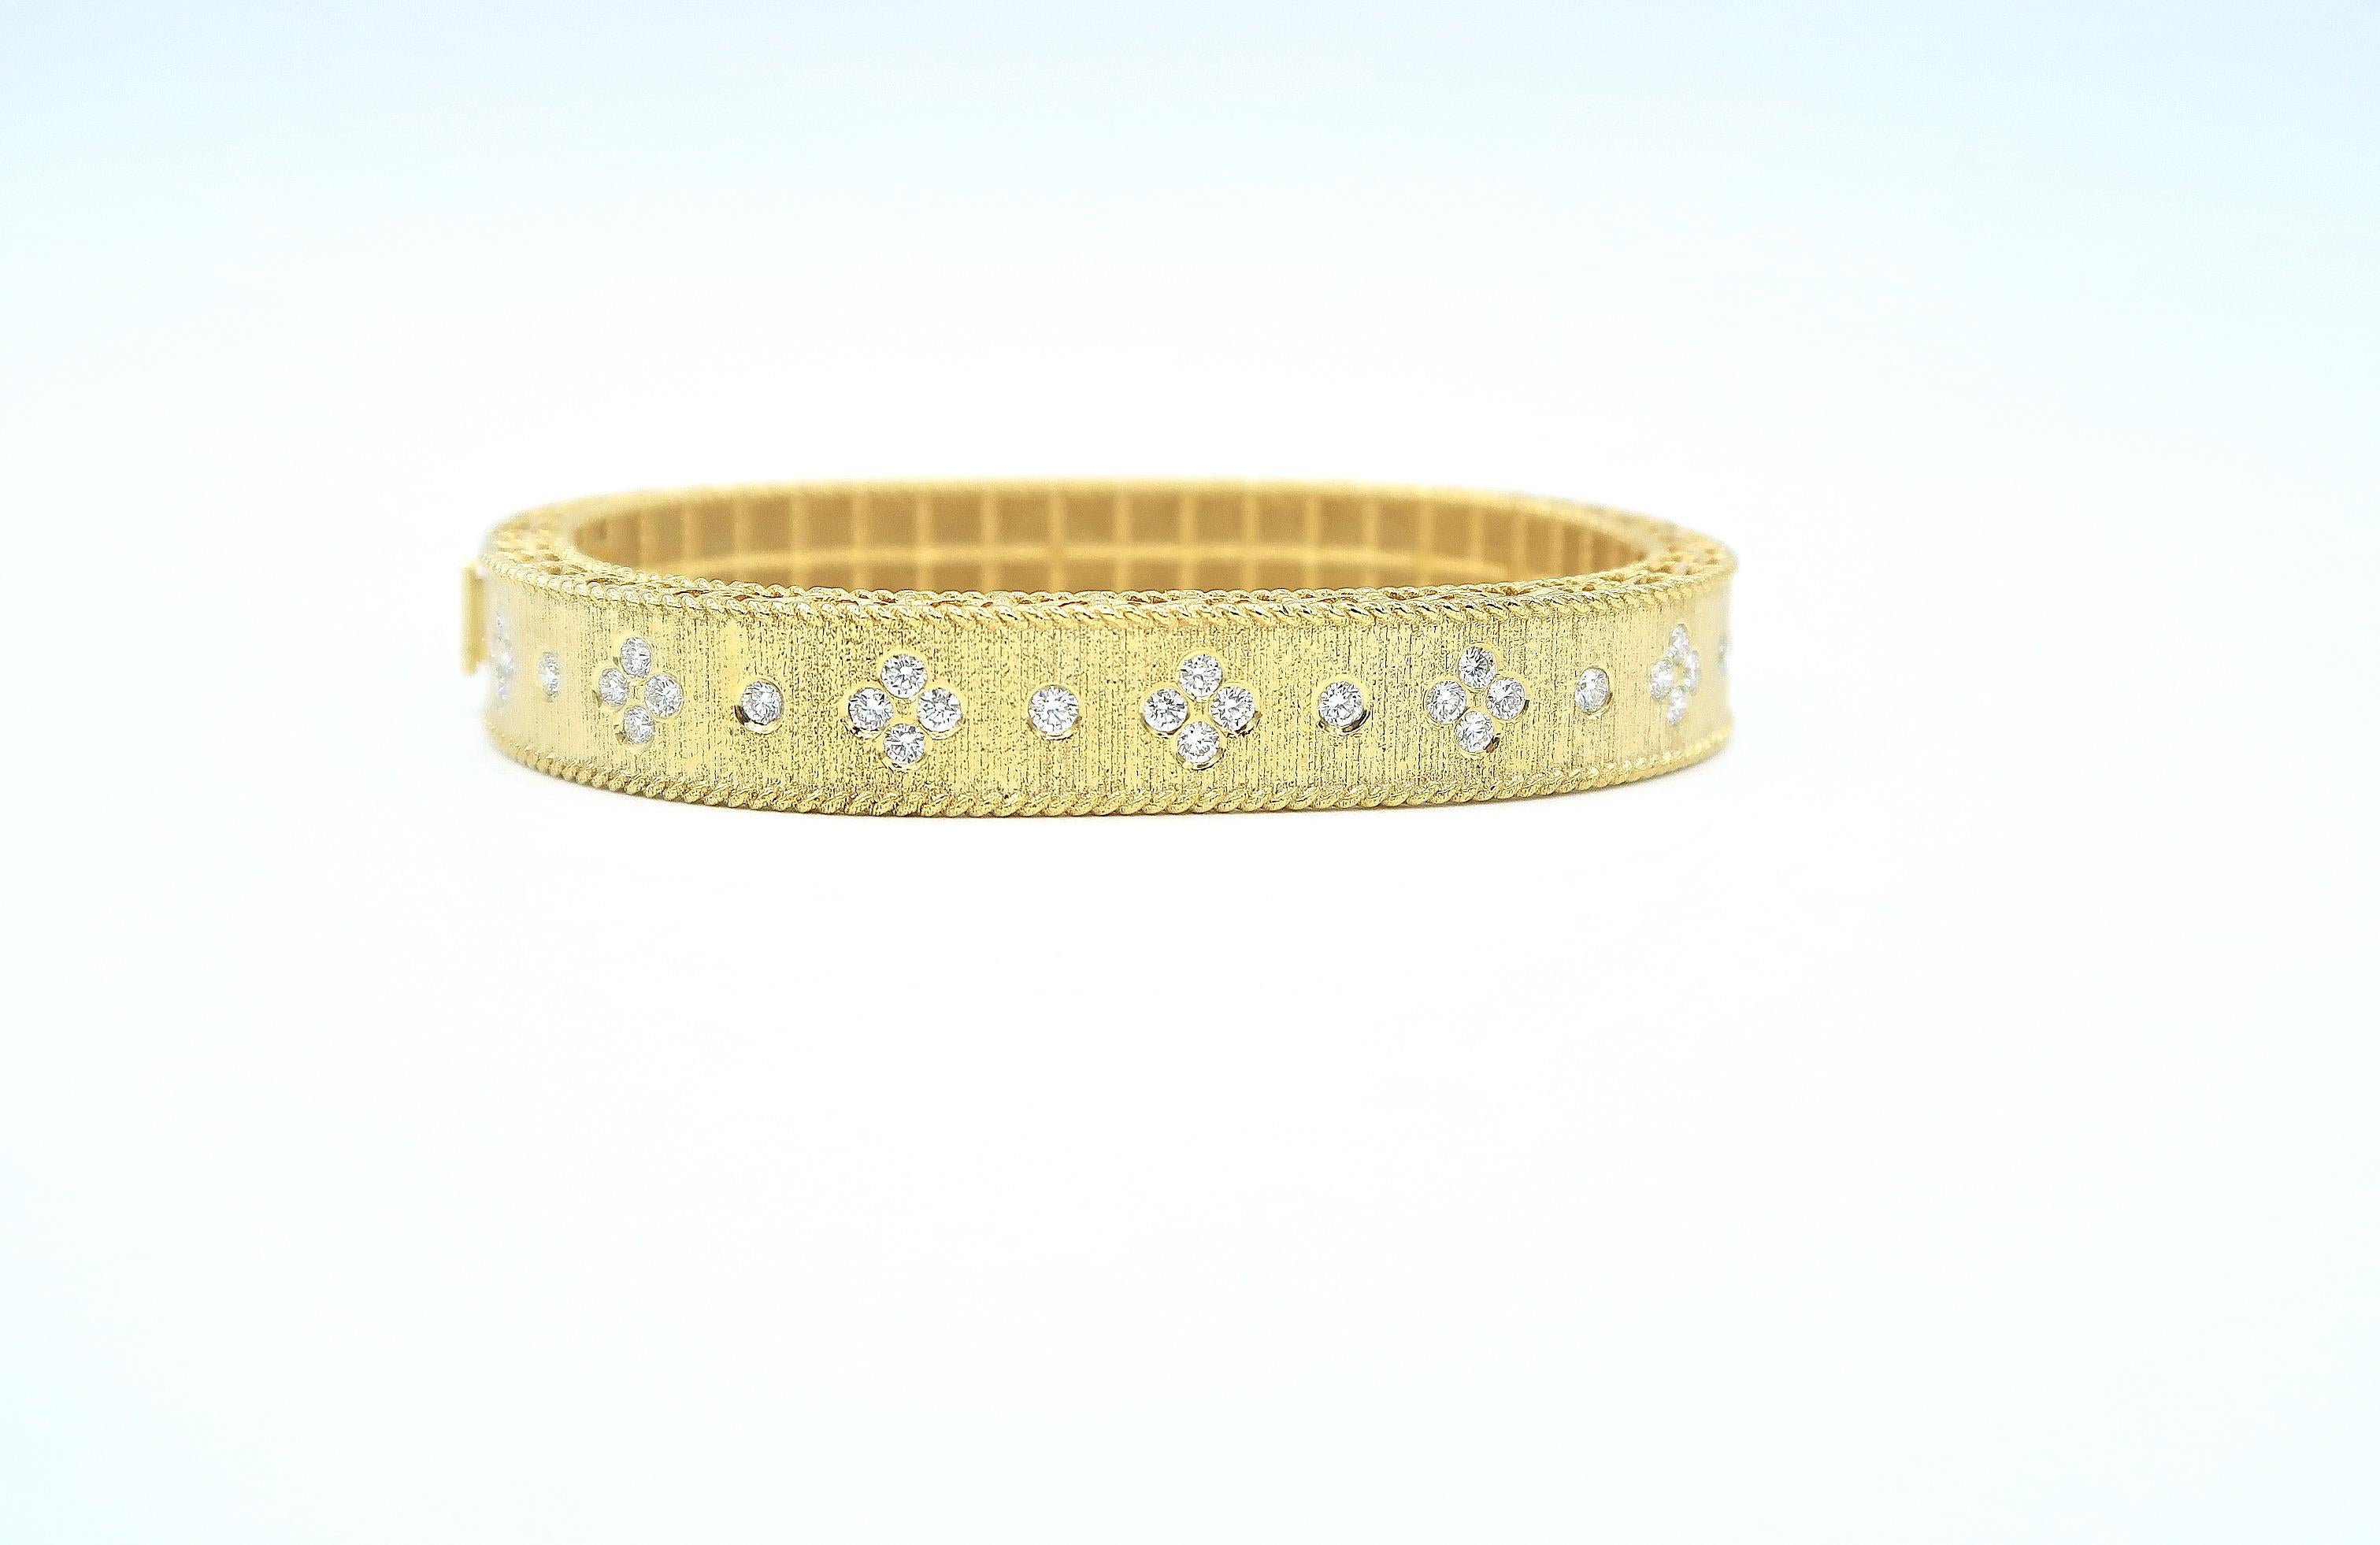 Diamond Dotted Sateen Finish Engraved Surface 18 Karat Yellow Gold Bangle in Rounded Rectangular Shape

Gold: 18K Yellow Gold, 30.96 g
Diamond: Brilliant, 1.18 ct